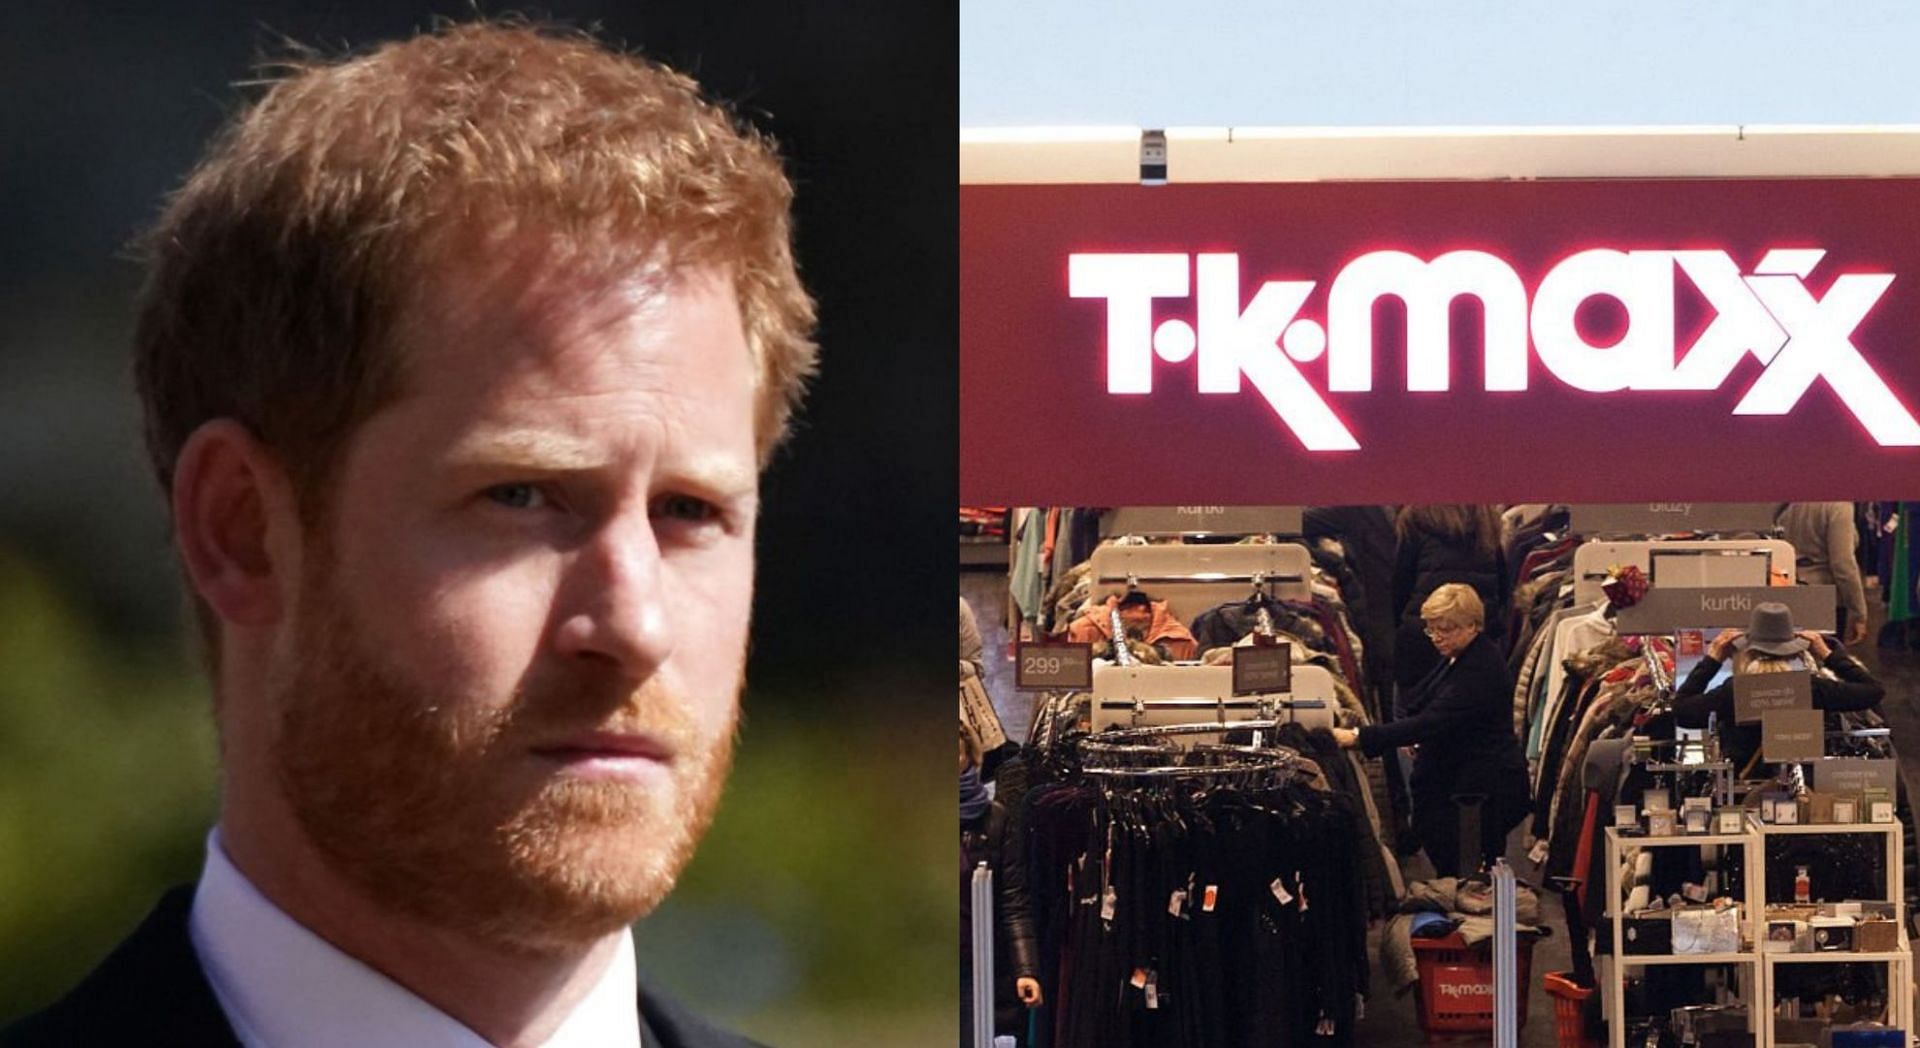 Prince Harry shared his fondness of shopping from TK Maxx in his memoir (Image via Getty Images)